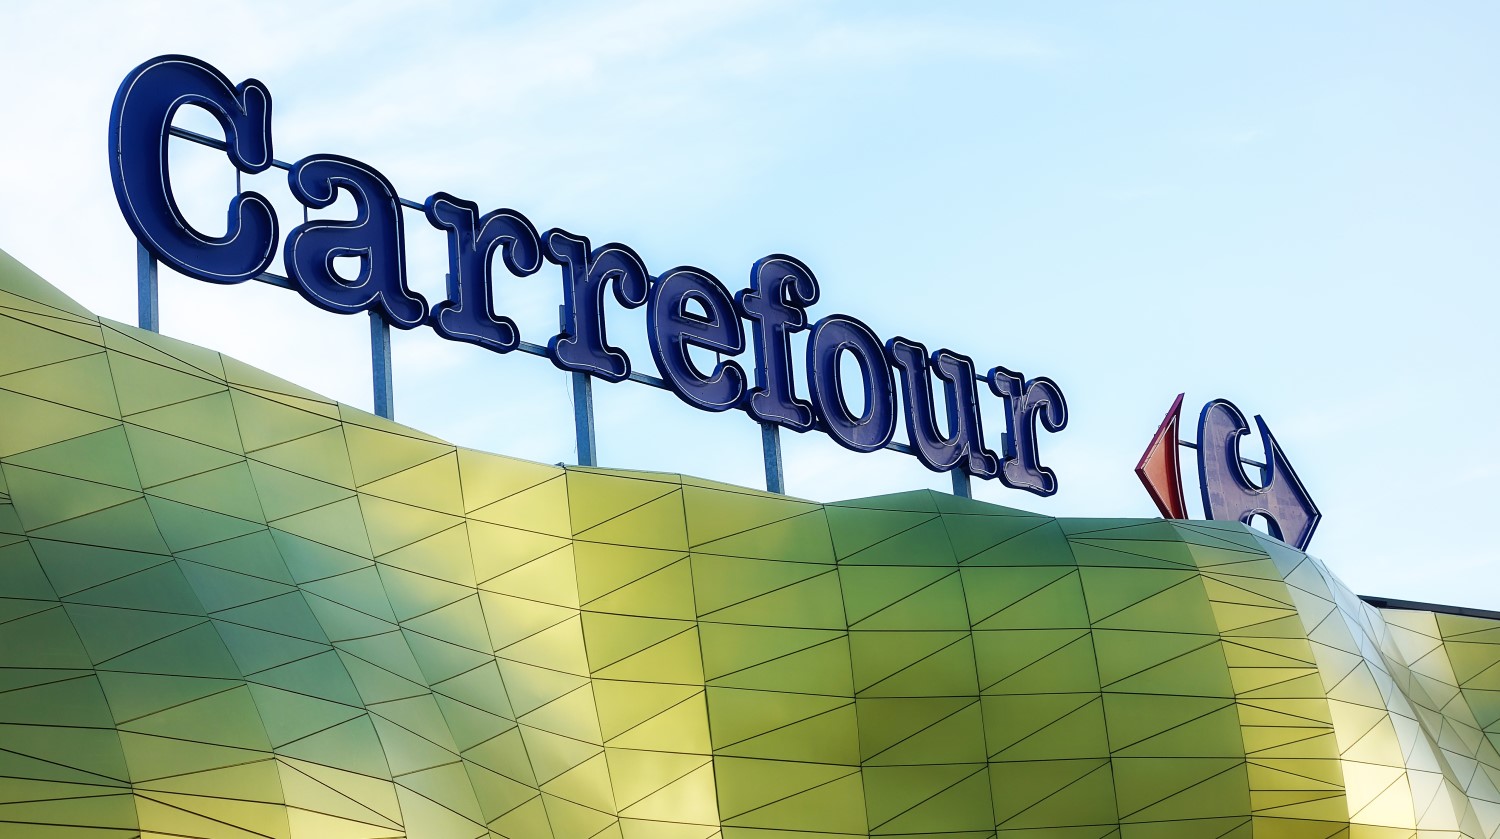 Retail Giant Carrefour Saw Sales Boost From Blockchain Tracking